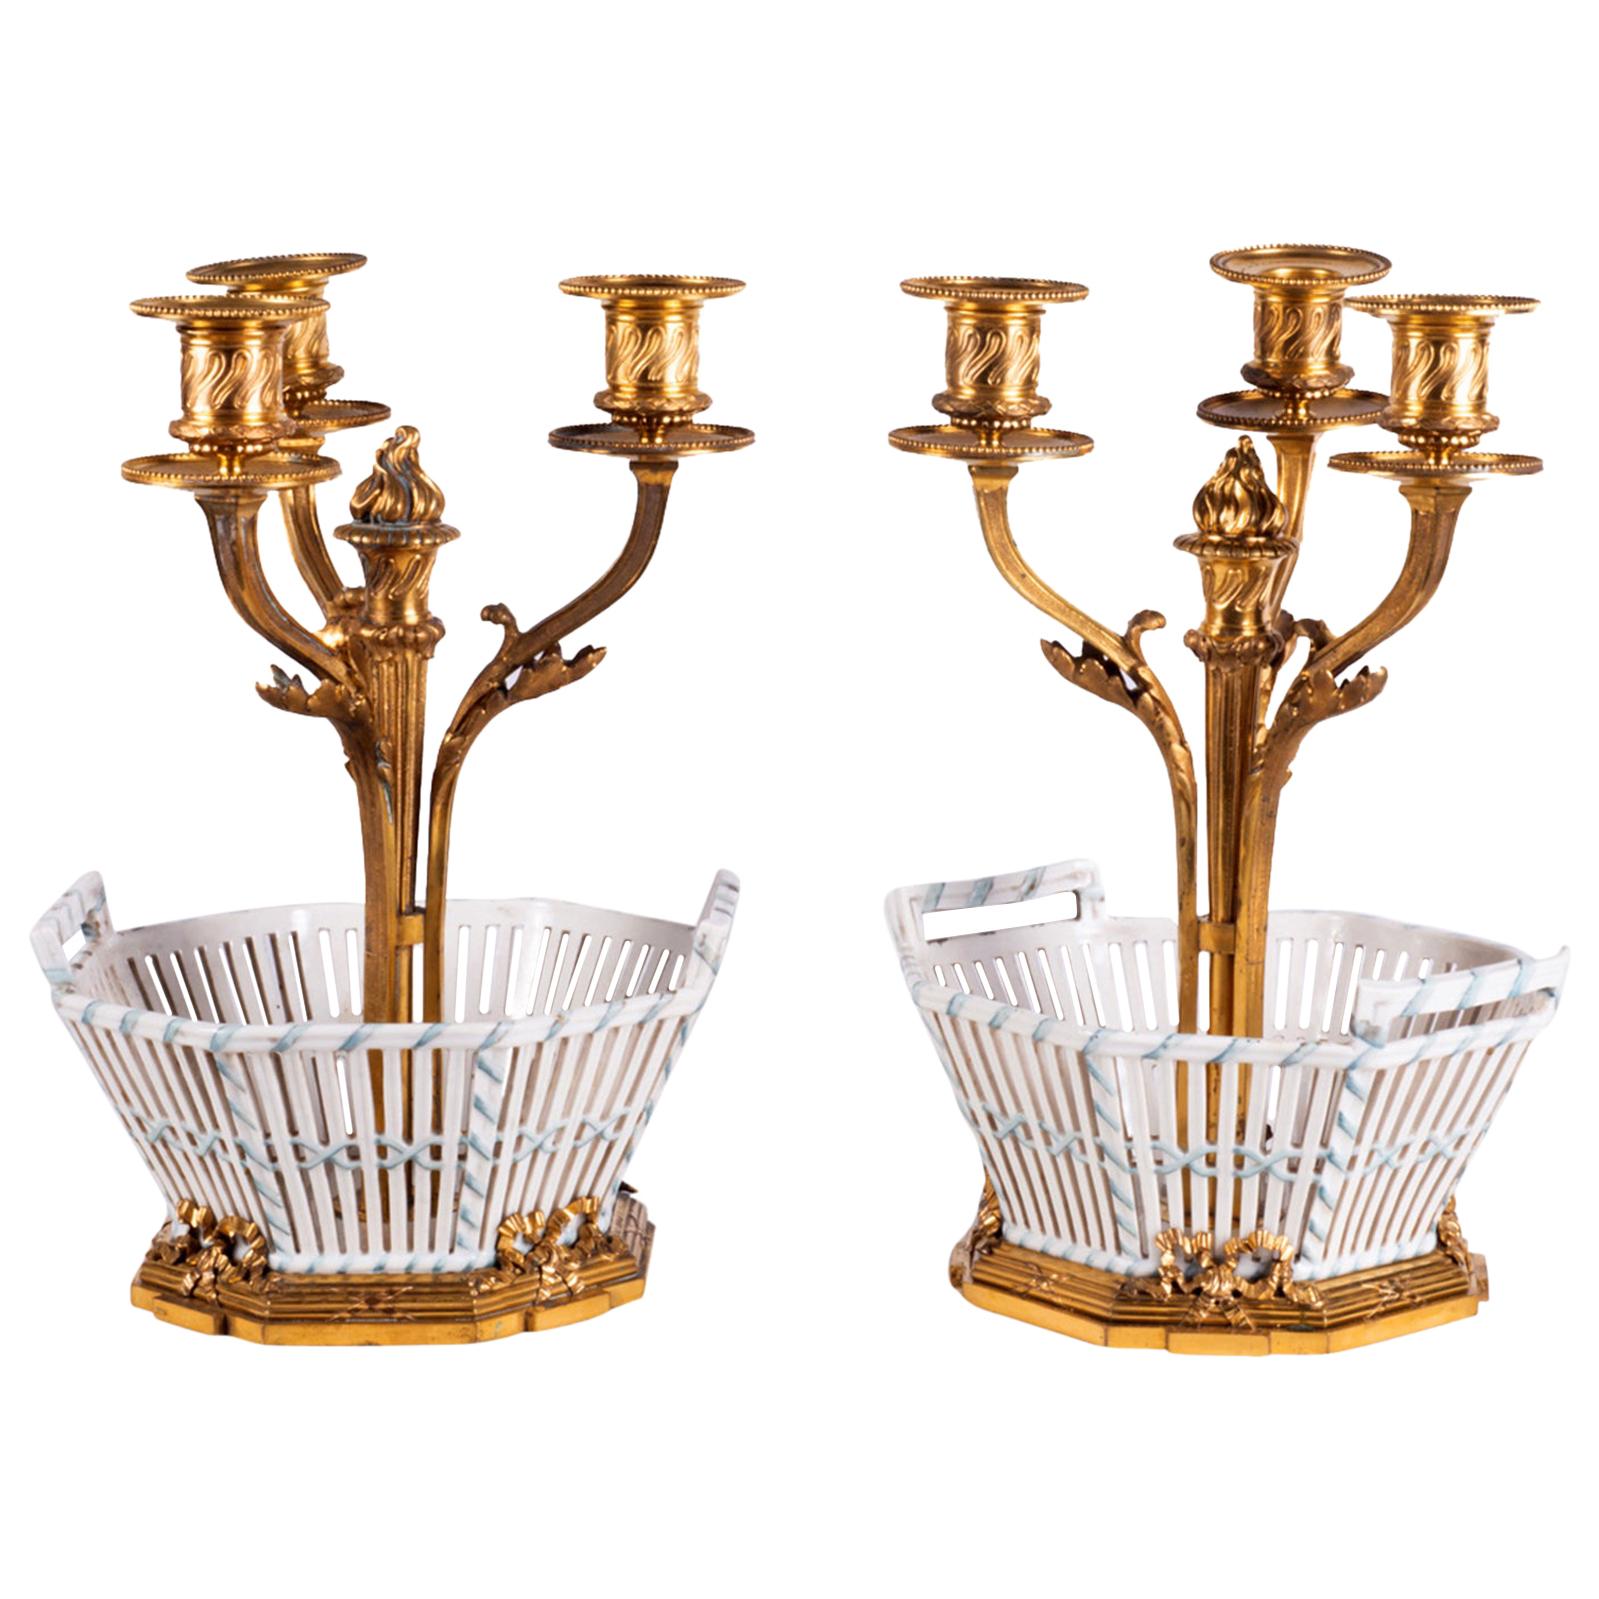 Pair of Late 19th Century French Candelabra